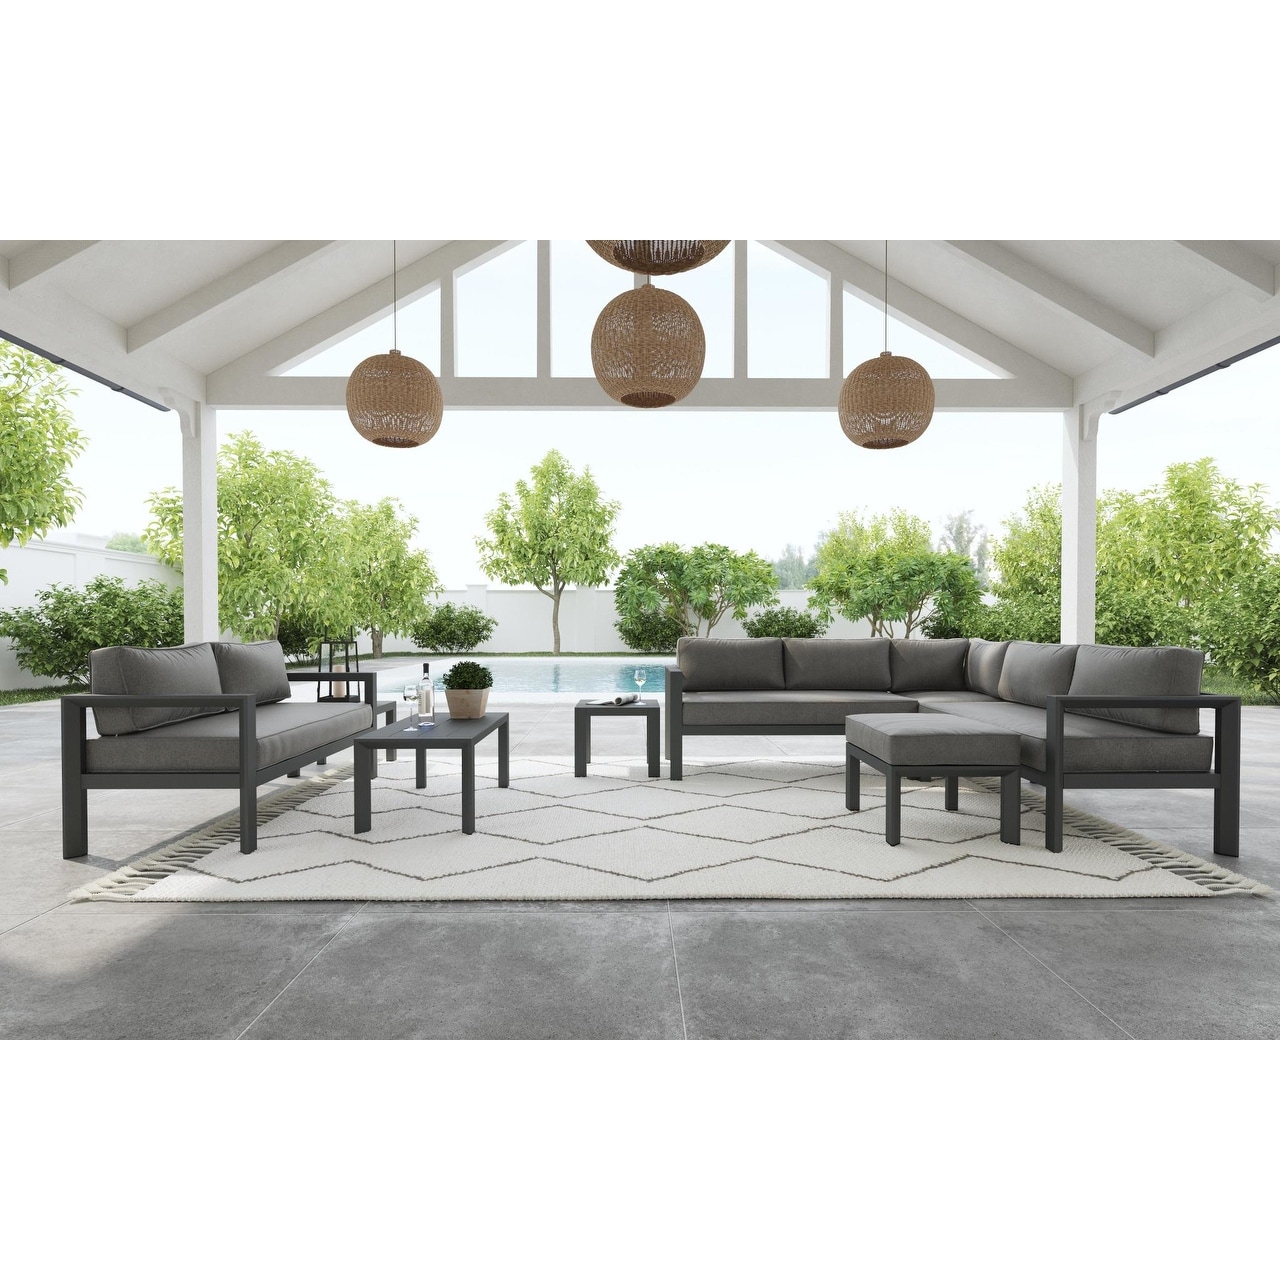 Grayton Gray Aluminum Outdoor Aluminum Loveseat With Lounge Chairs And Coffee Table - 61 X 26 X 29